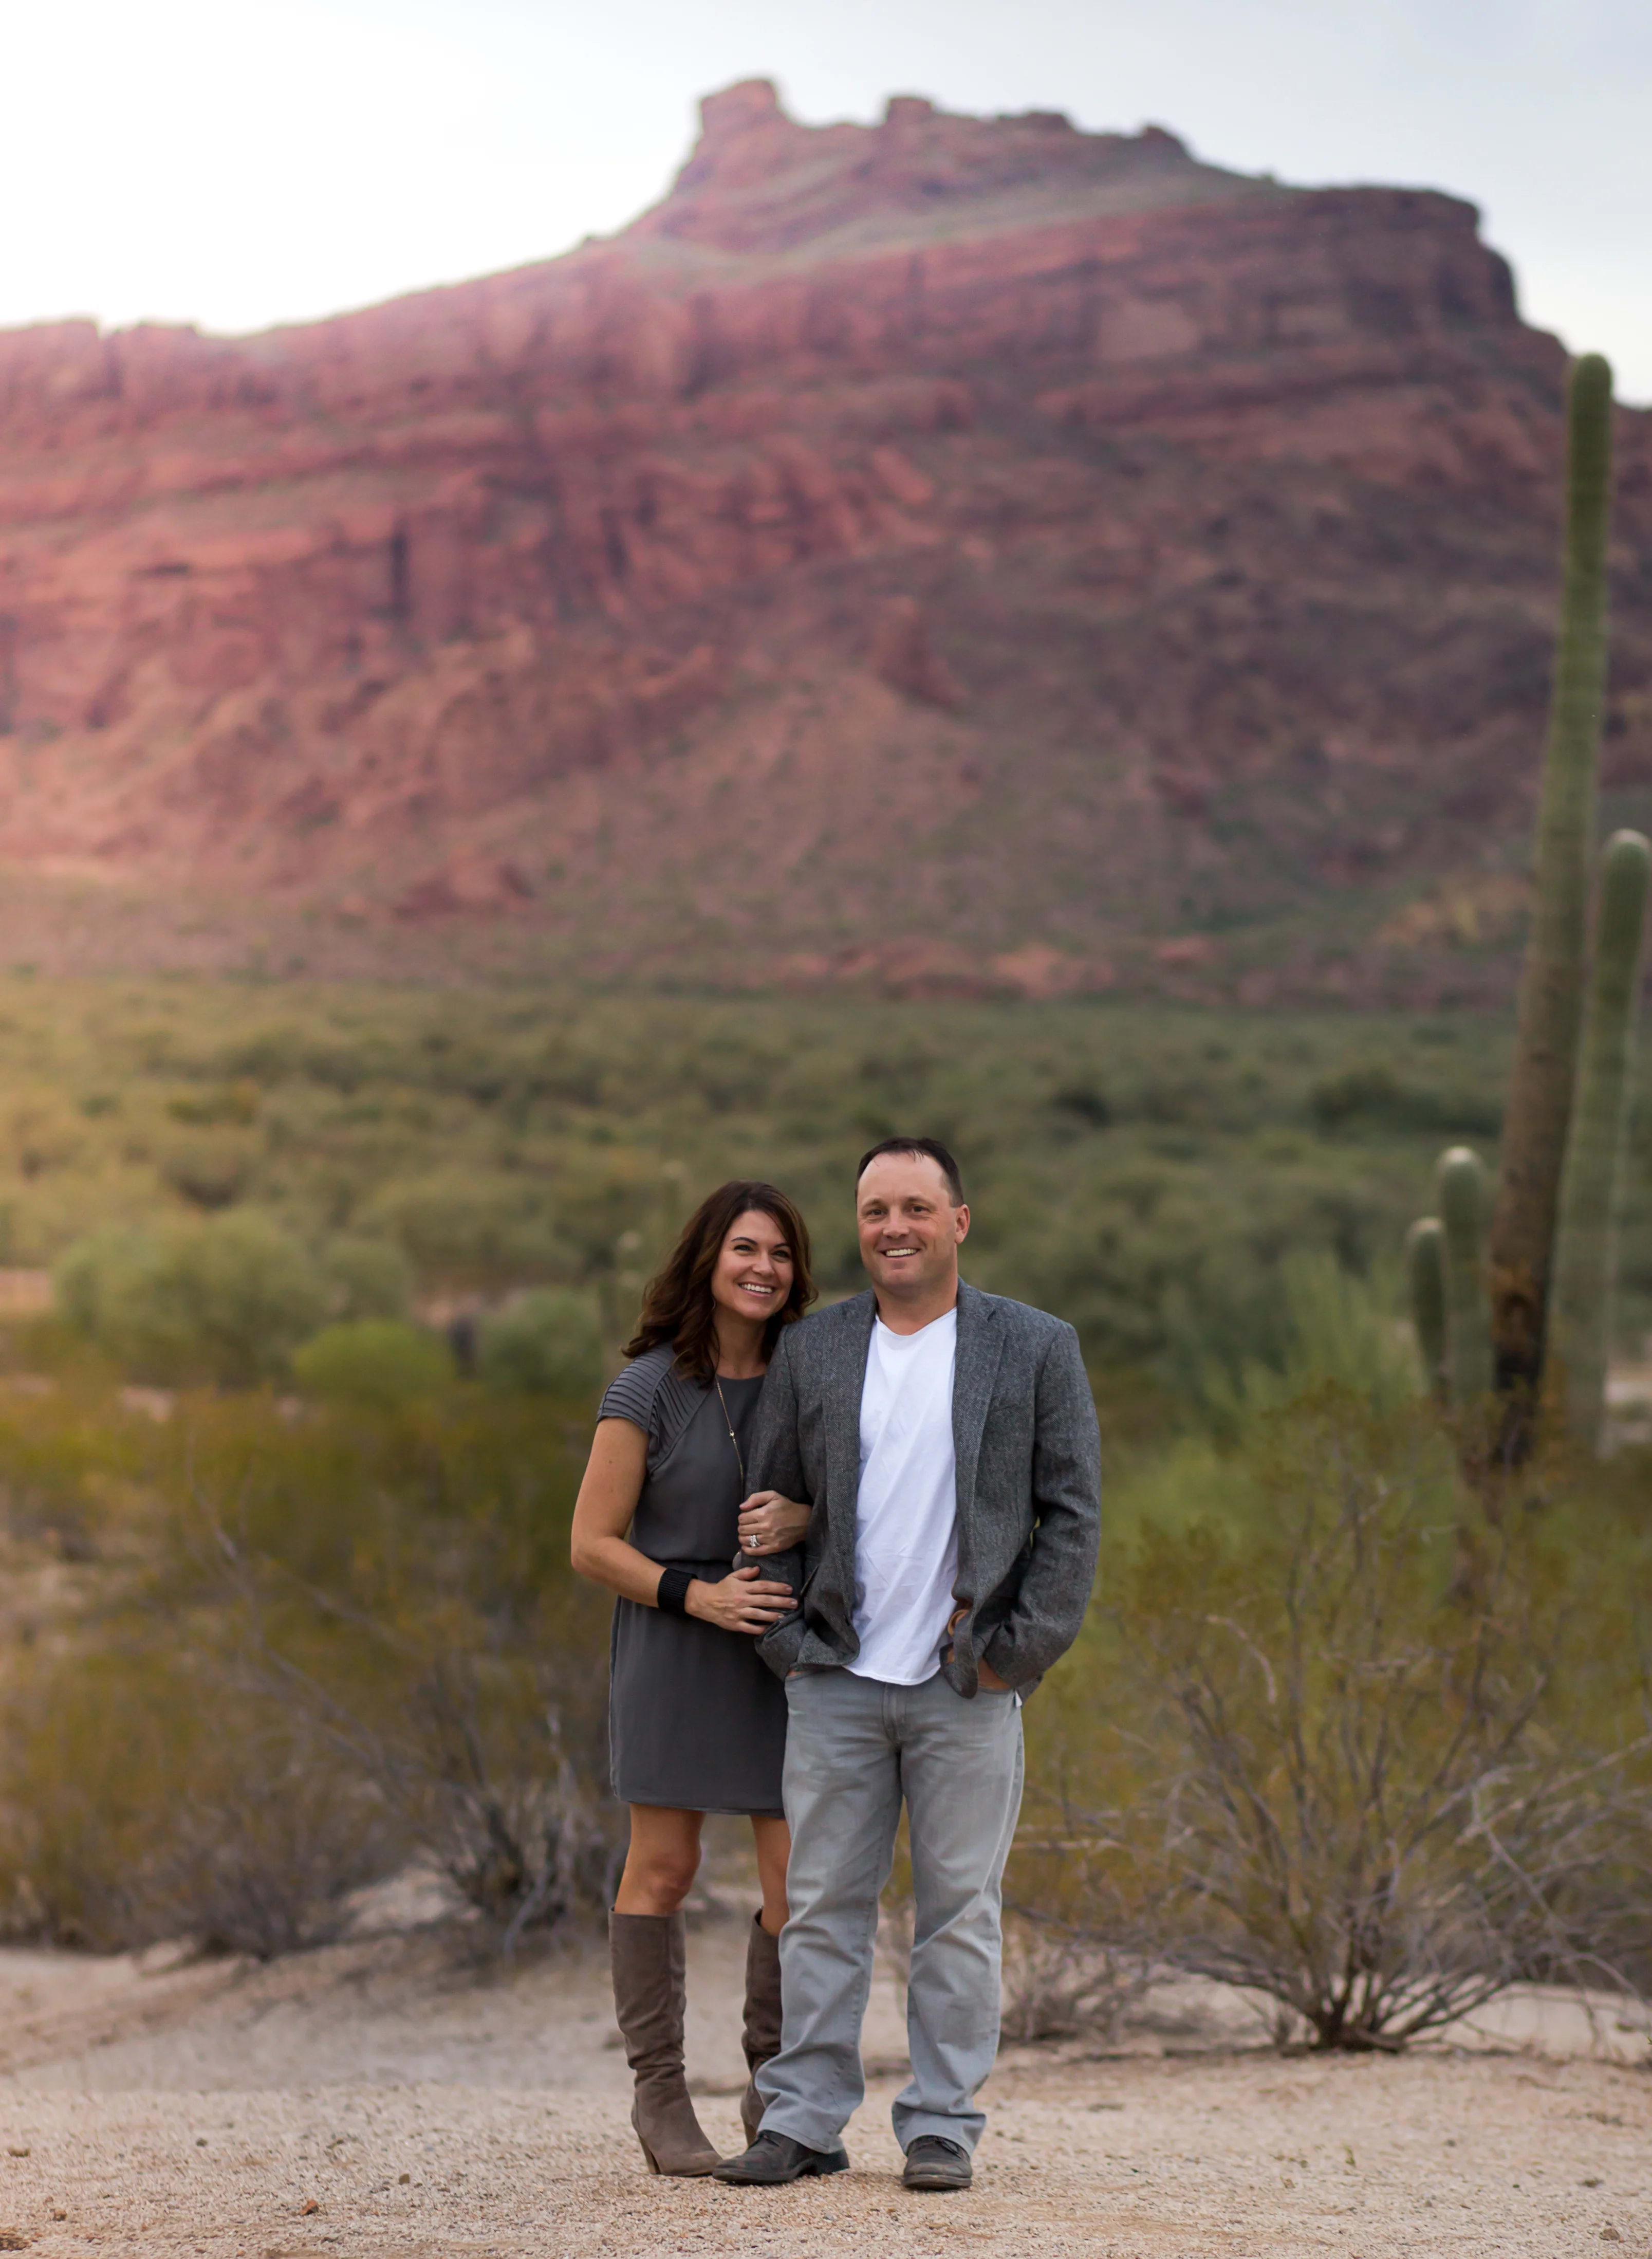 Brooklyn Bedding Owner John Merwin and Wife Kristin Merwin in front of red rock mountain